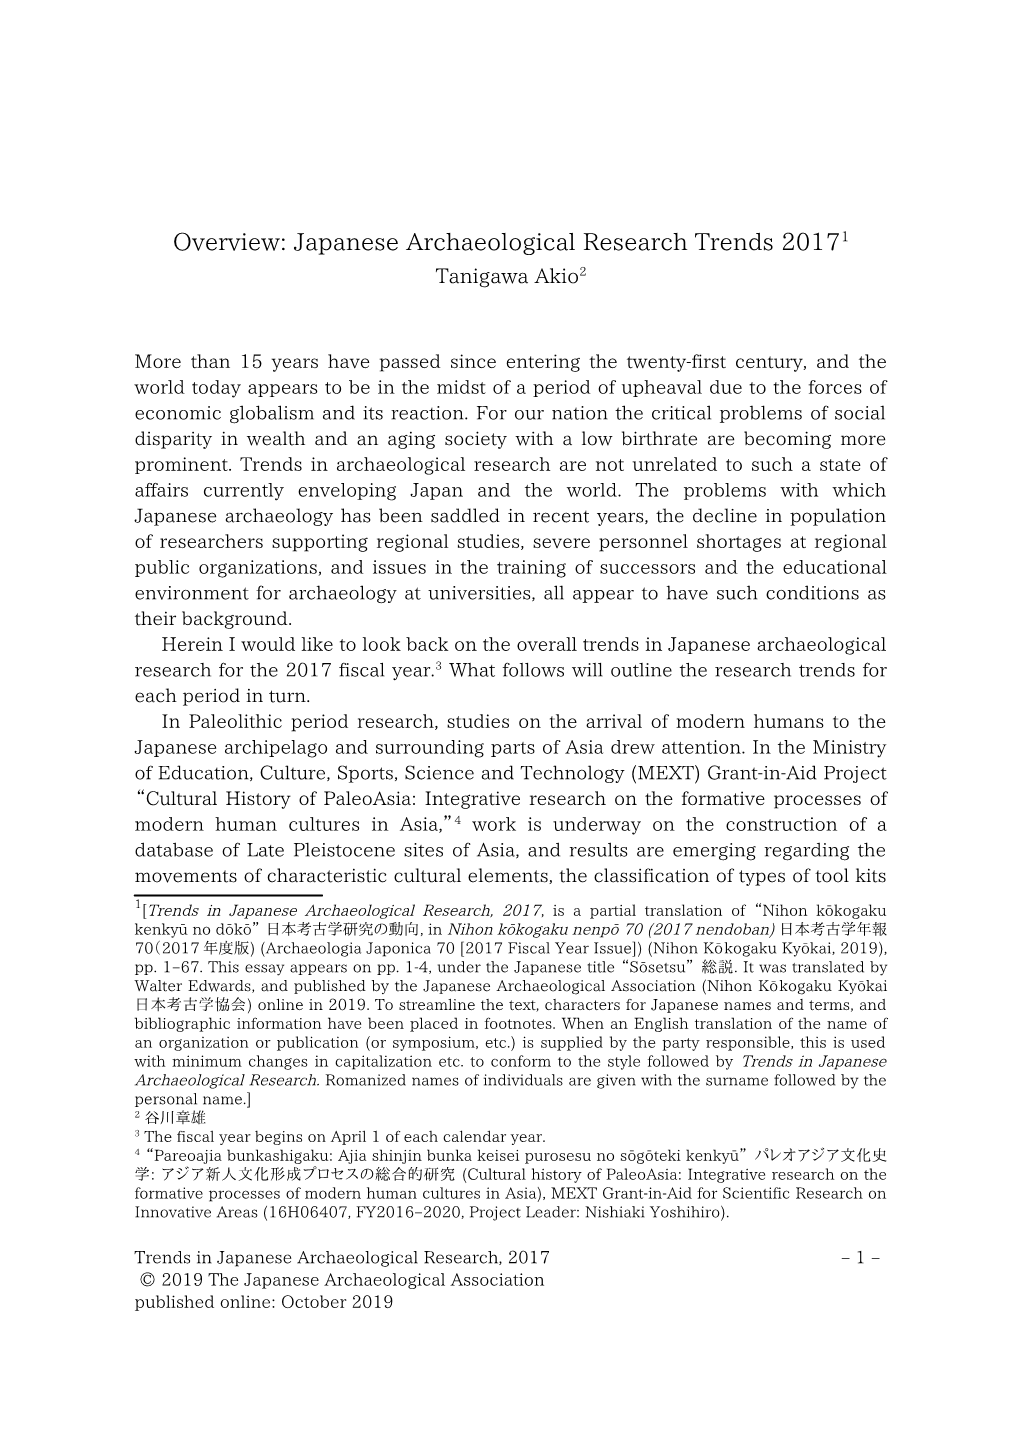 Overview: Japanese Archaeological Research Trends 20171 Tanigawa Akio2